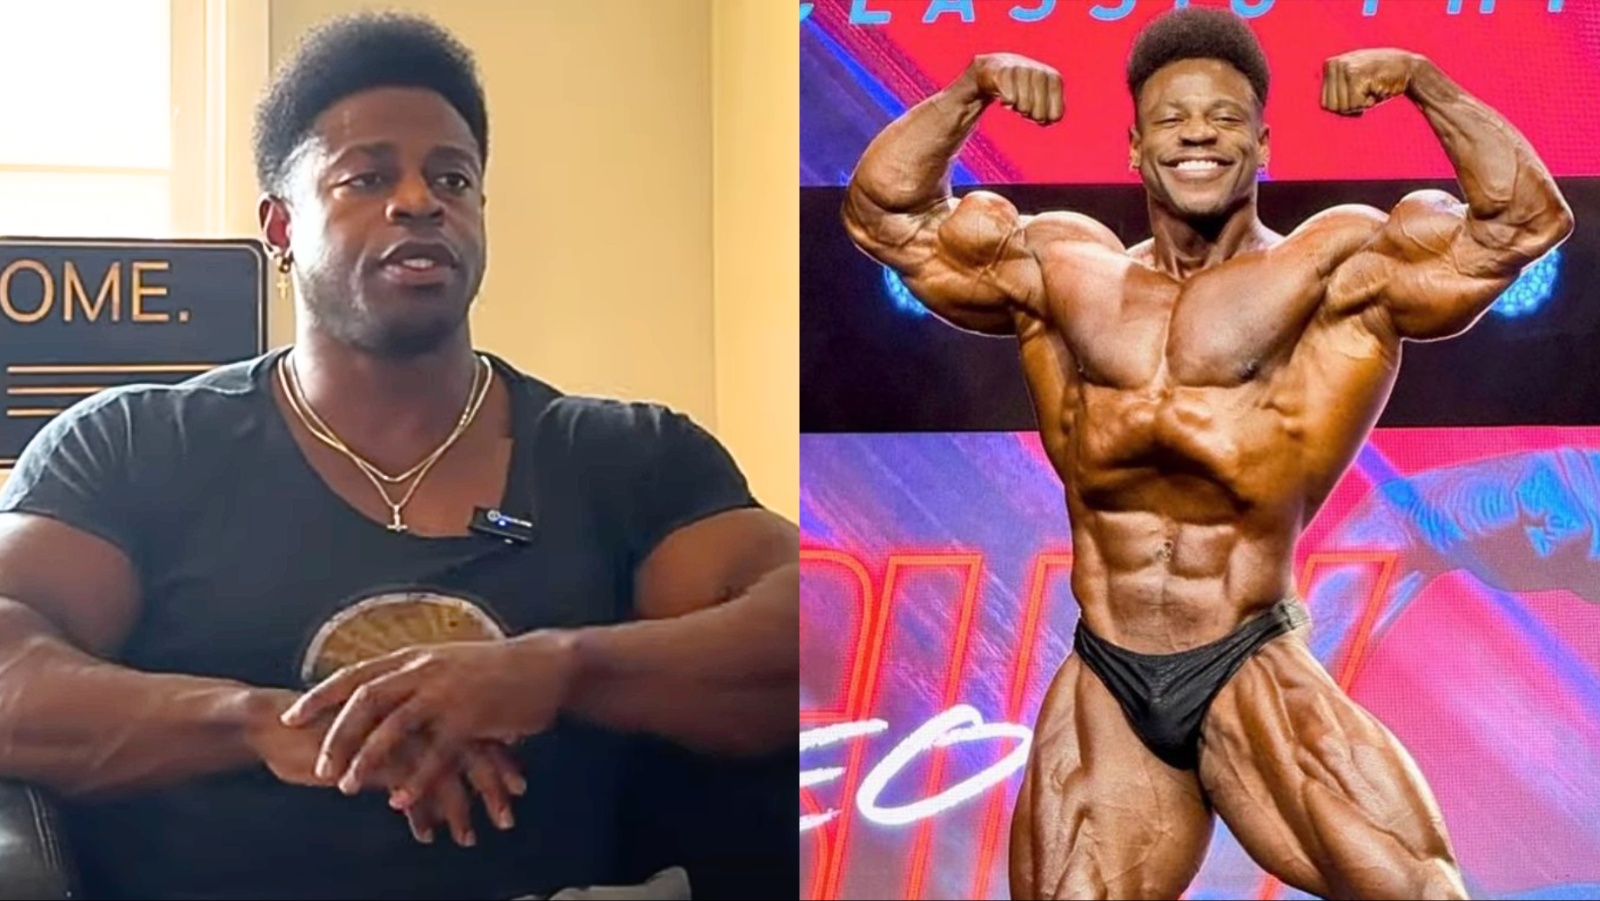 Breon Ansley Explains How Steroids Can Be Used “Safely”: ‘We Can Actually Be Healthier When Taking Them’  Fitness Volt [Video]